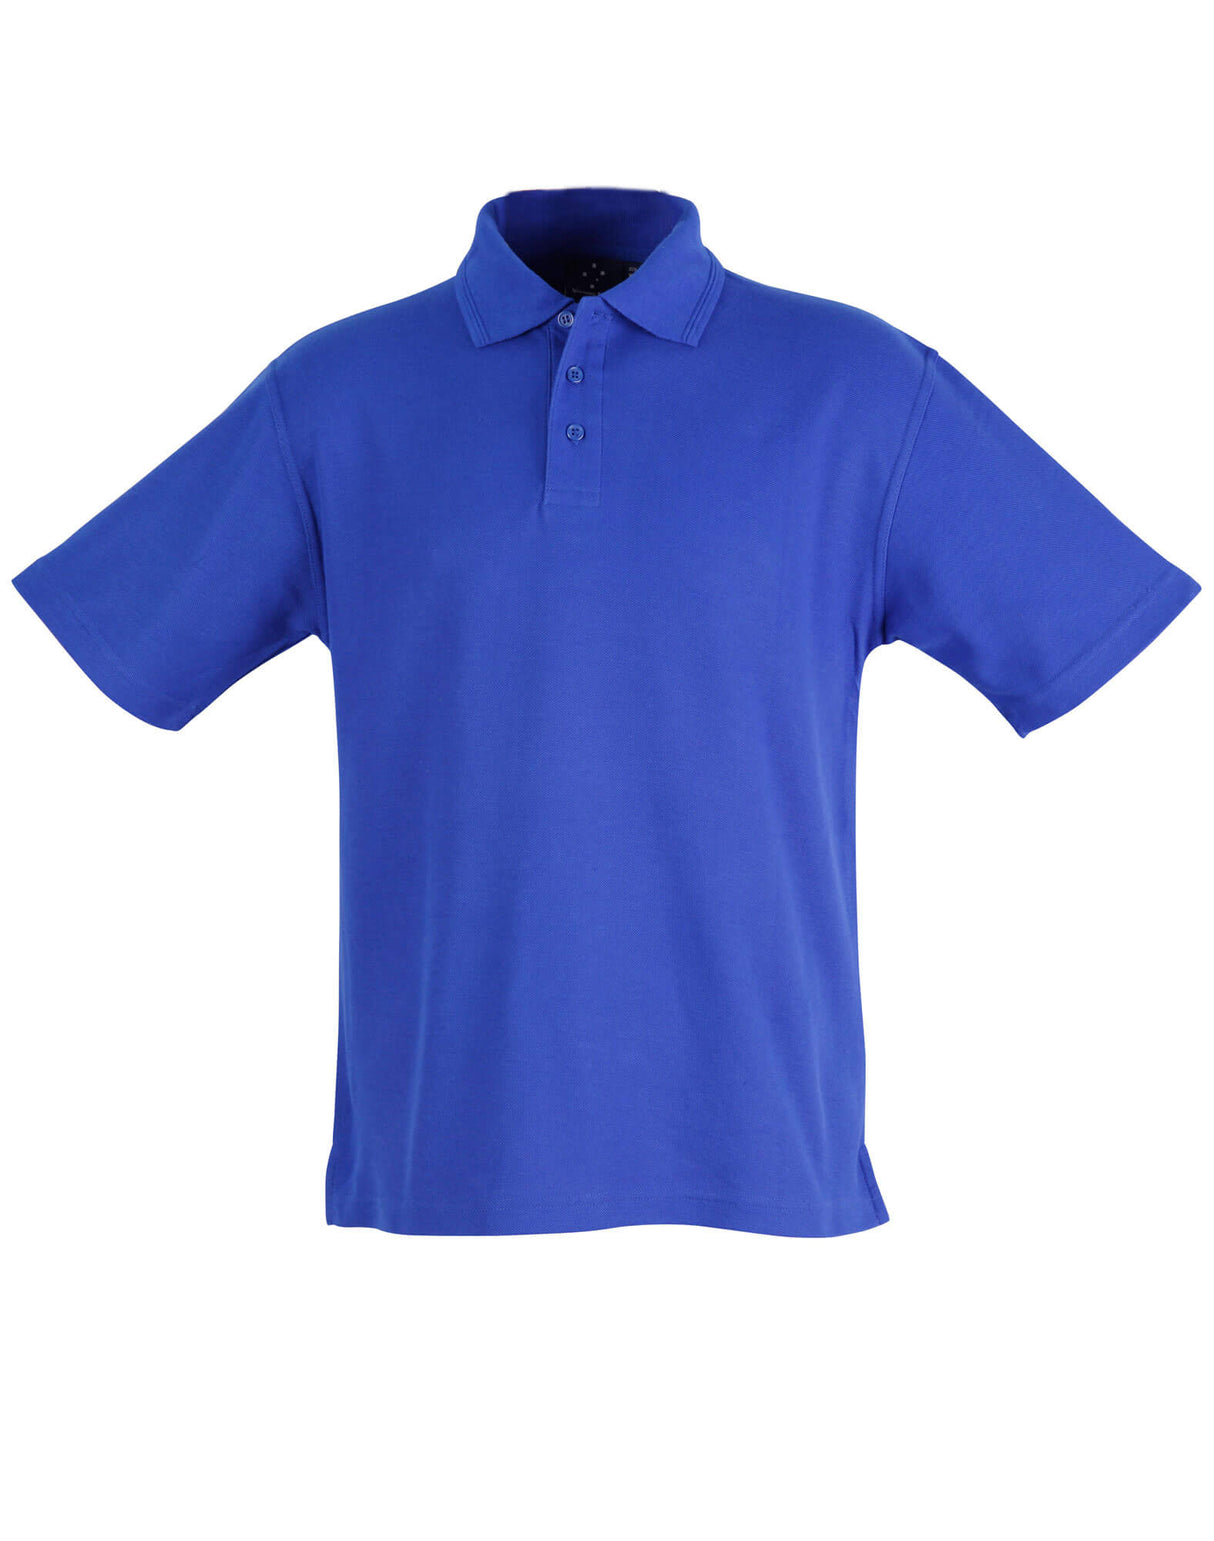 PS11 Traditional Polo Unisex